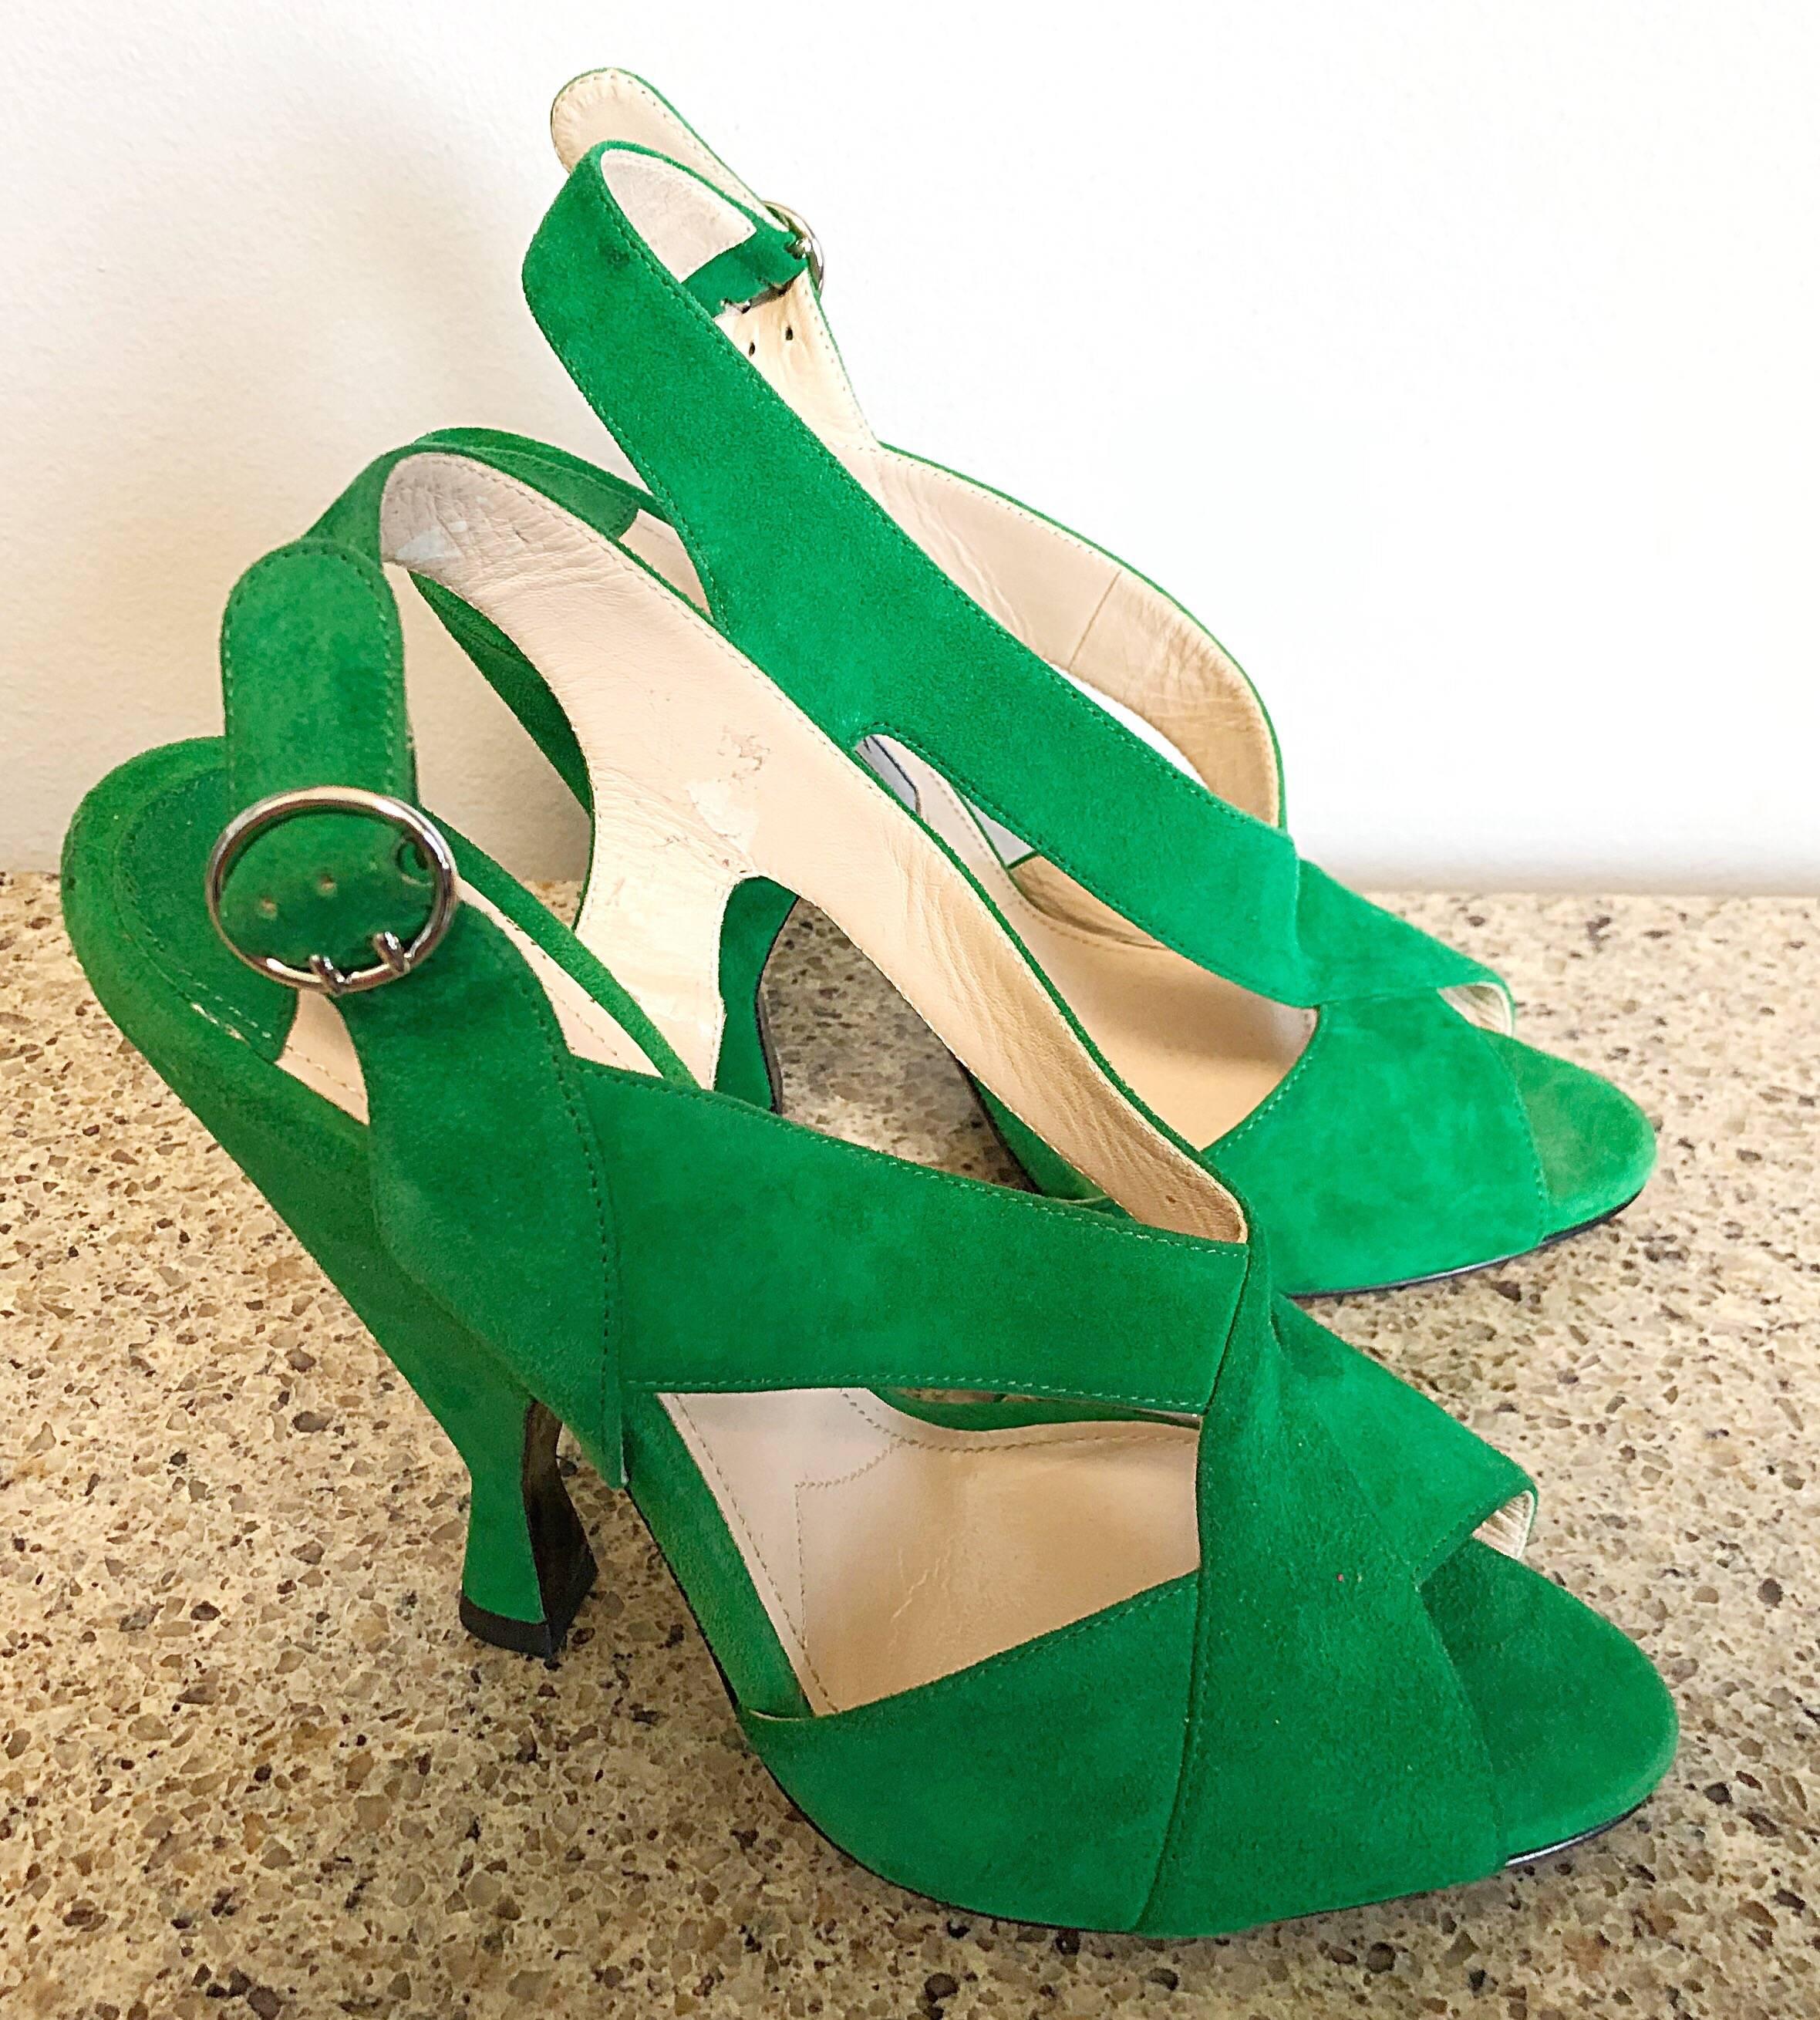 New Prada Size 36.5 / 6.5 Runway Kelly Green Suede Sandal High Heels Shoes In New Condition For Sale In San Diego, CA